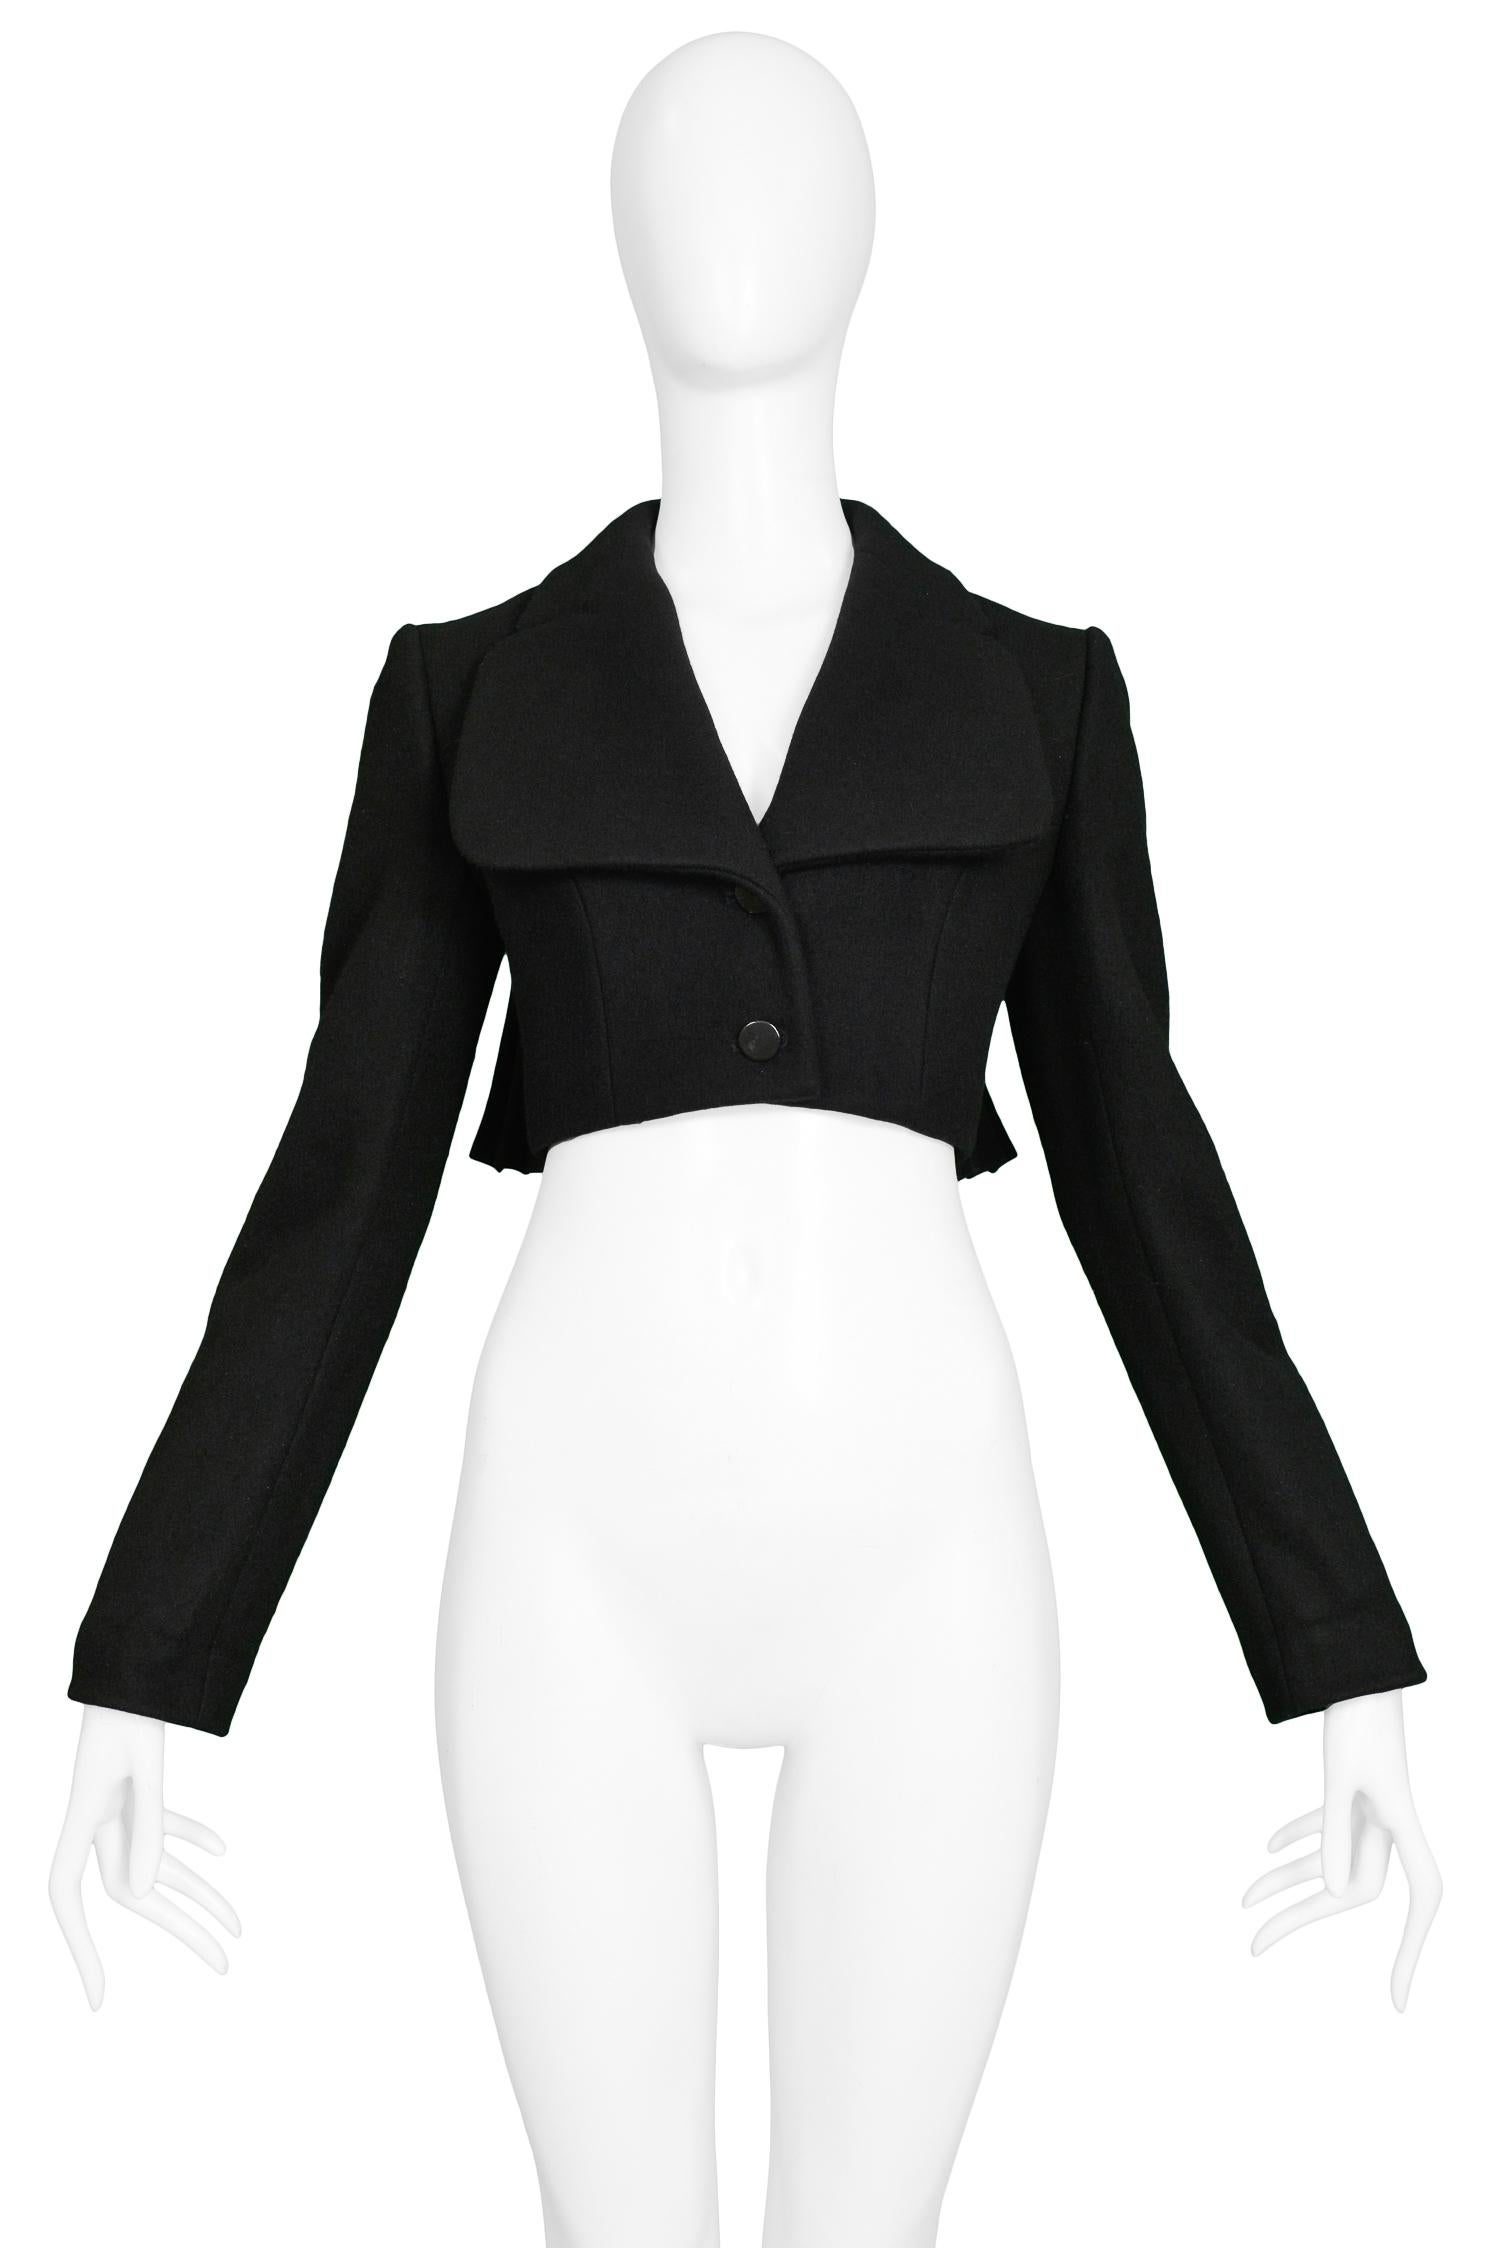 Vintage Azzedine Alaia black wool and cashmere-blend cropped jacket with gathering at back, oversized lapel & corset underlay.

Excellent Condition.

Size: 38
